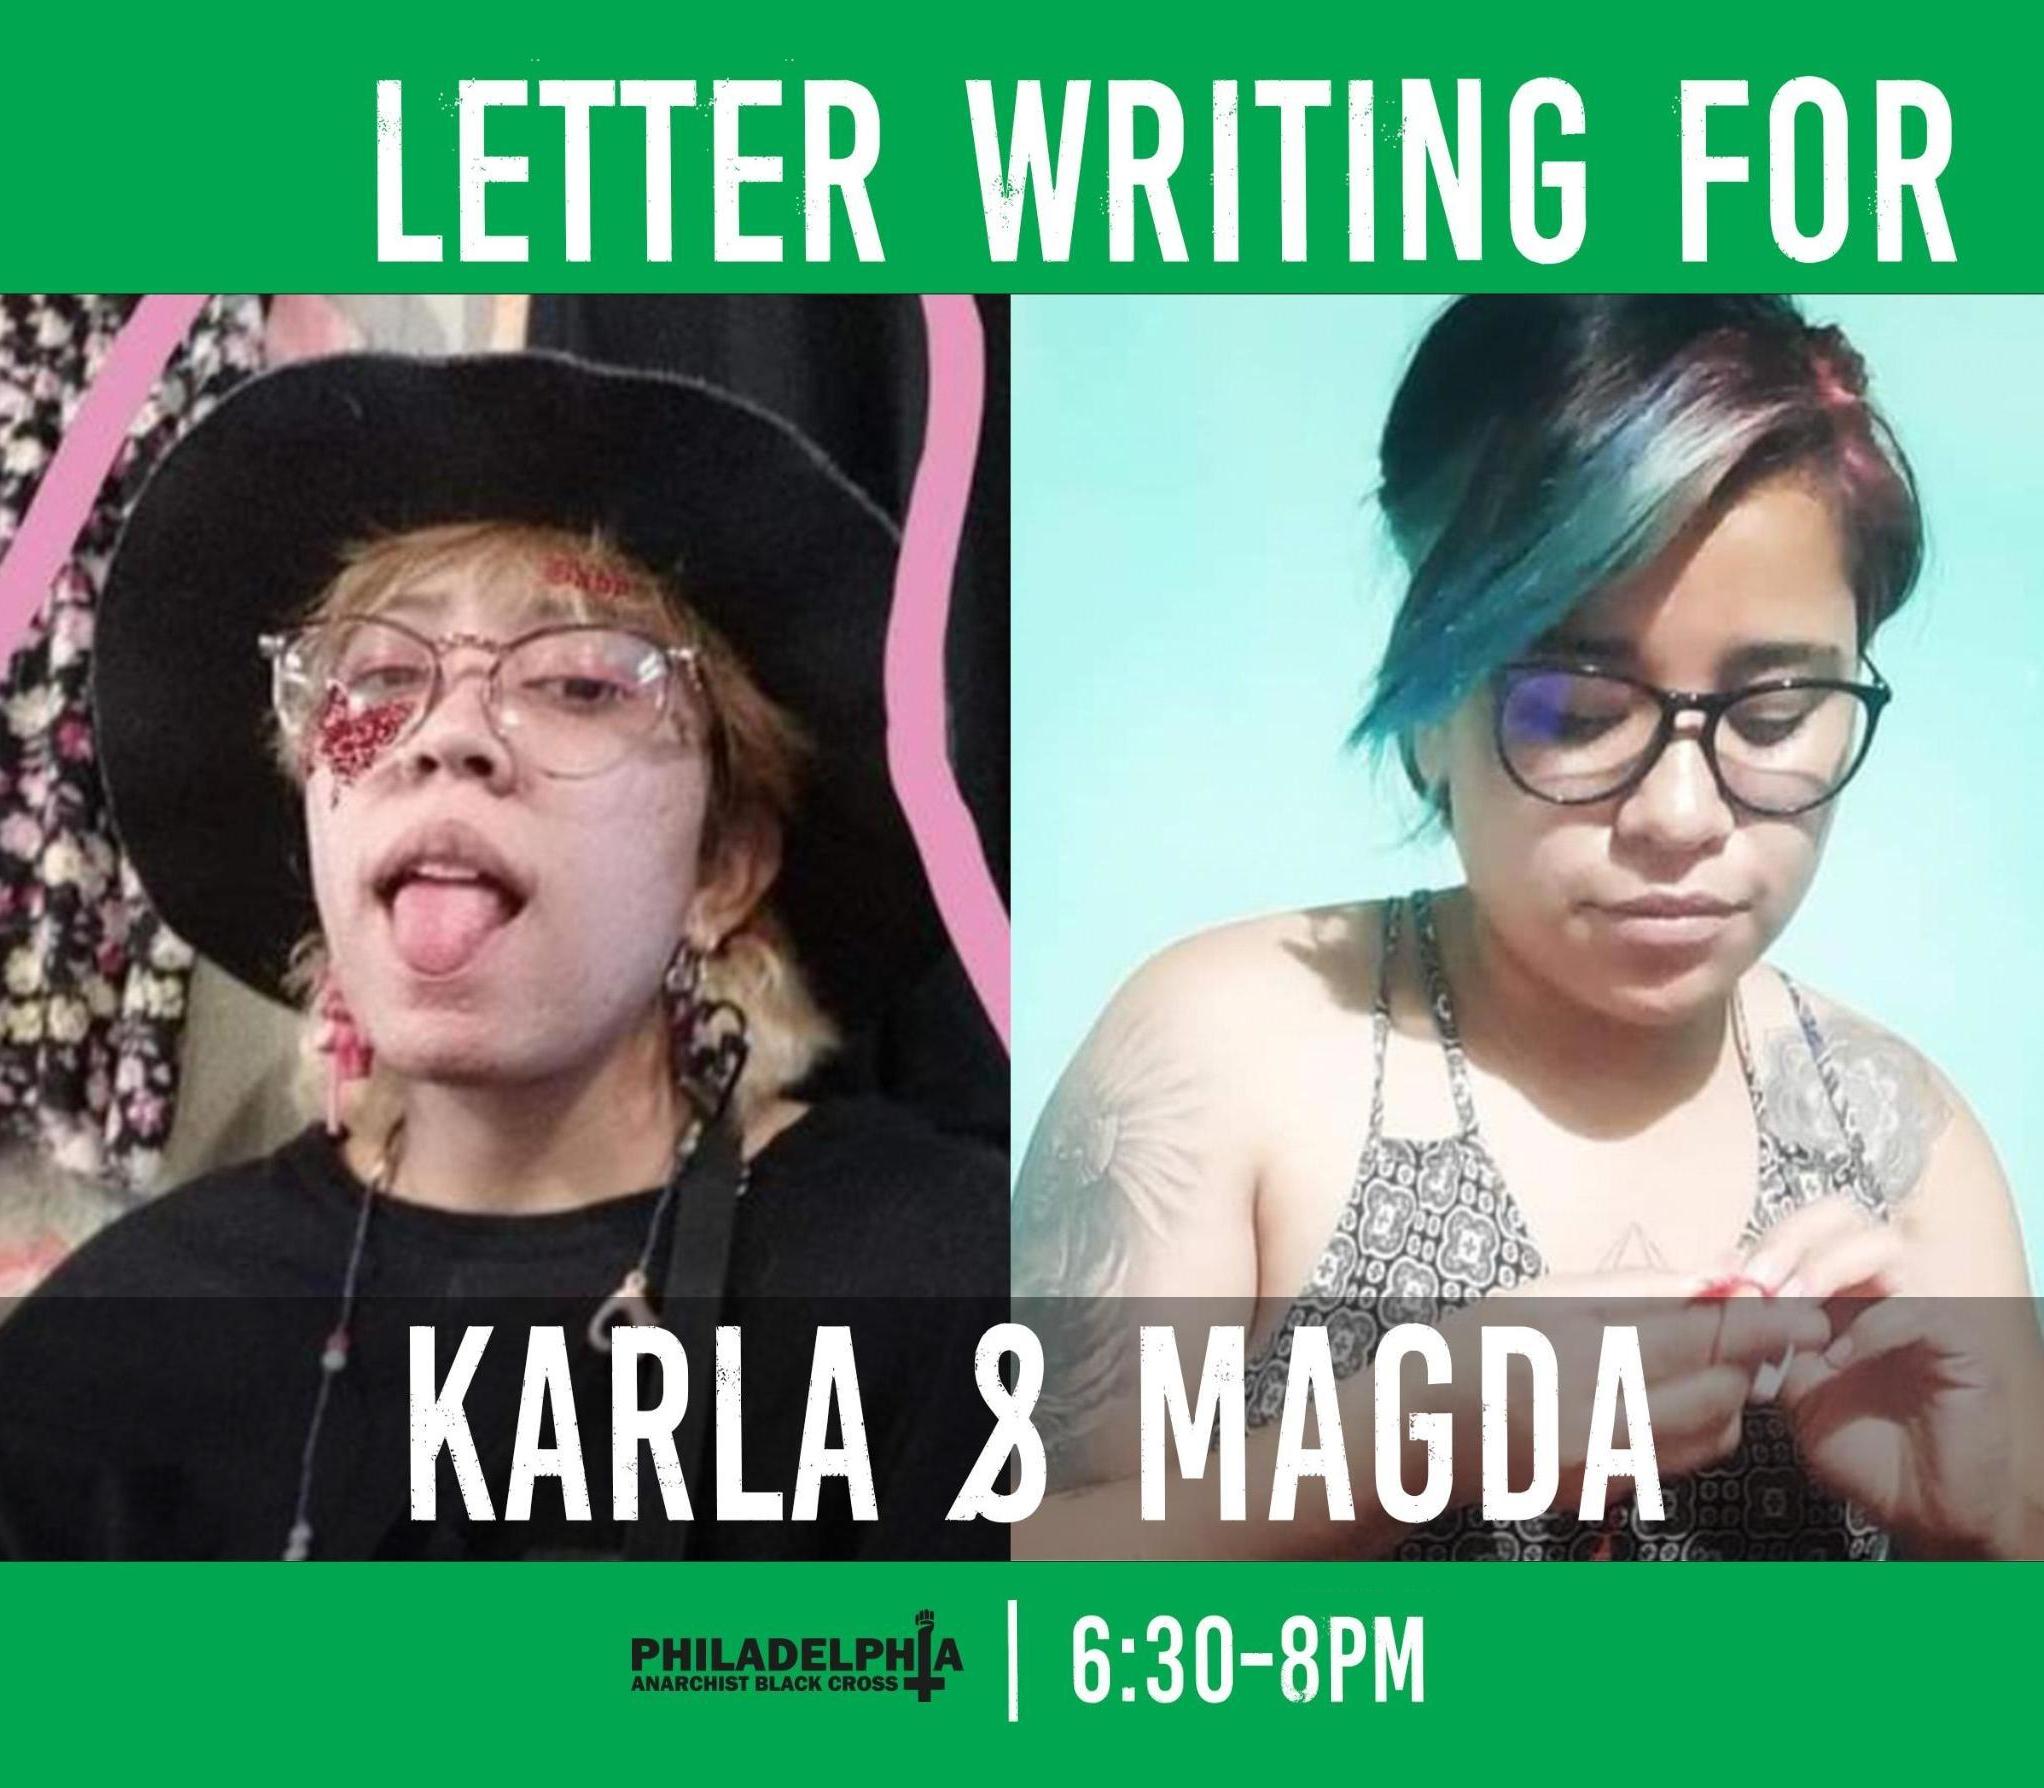 Tuesday July 5th: Letter-writing for Karla & Magda